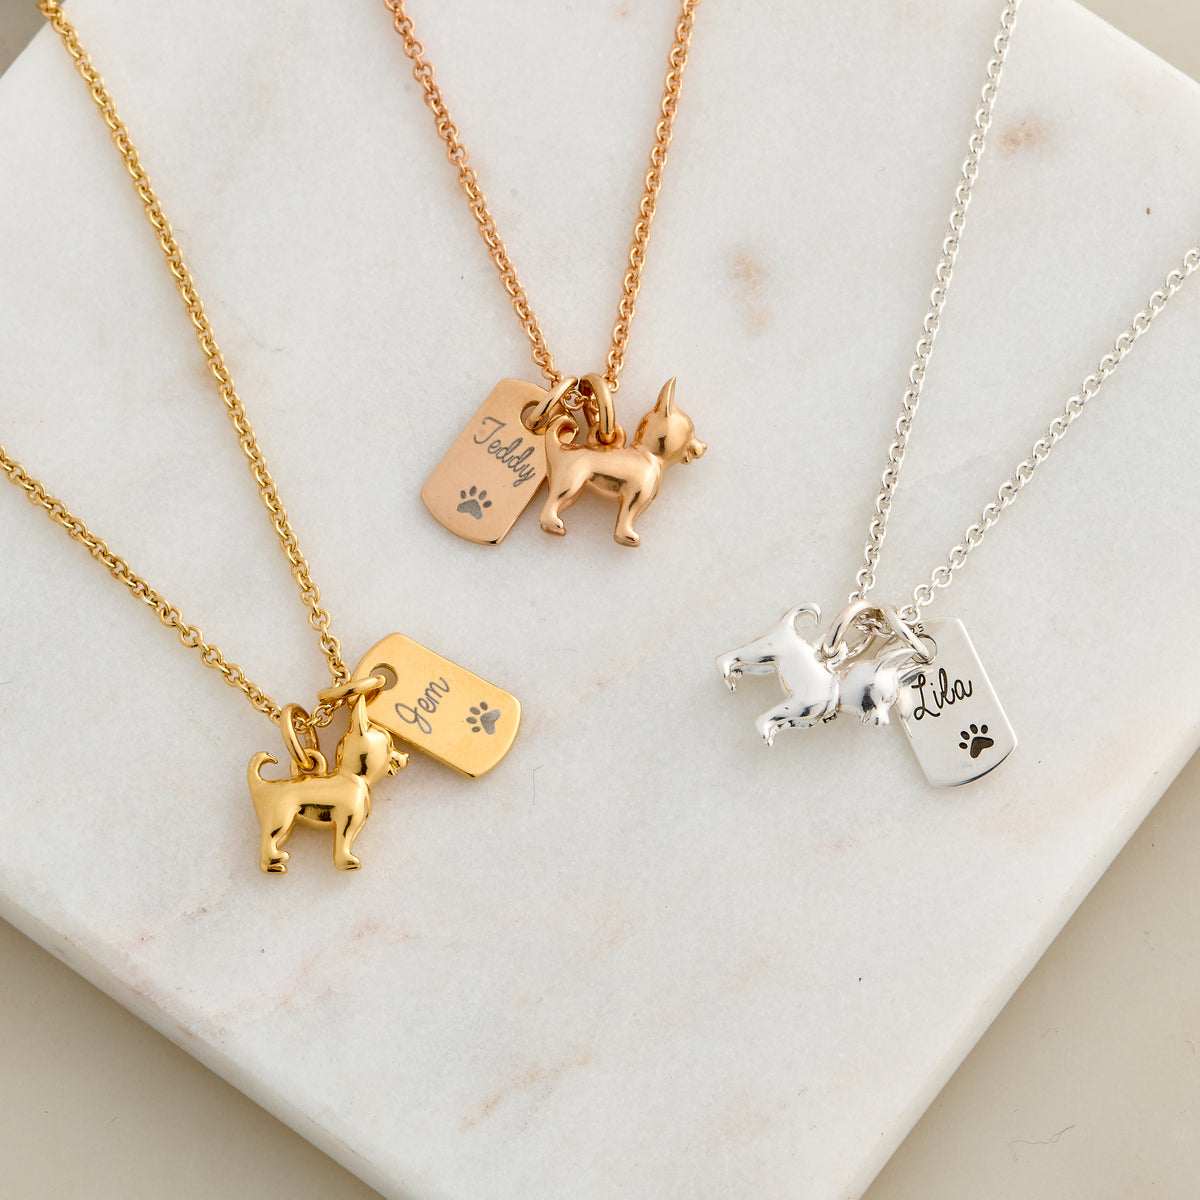 chihuahua necklace silver 18ct yellow rose gold plate scarlett jewellery personalized dog jewelry gift UK